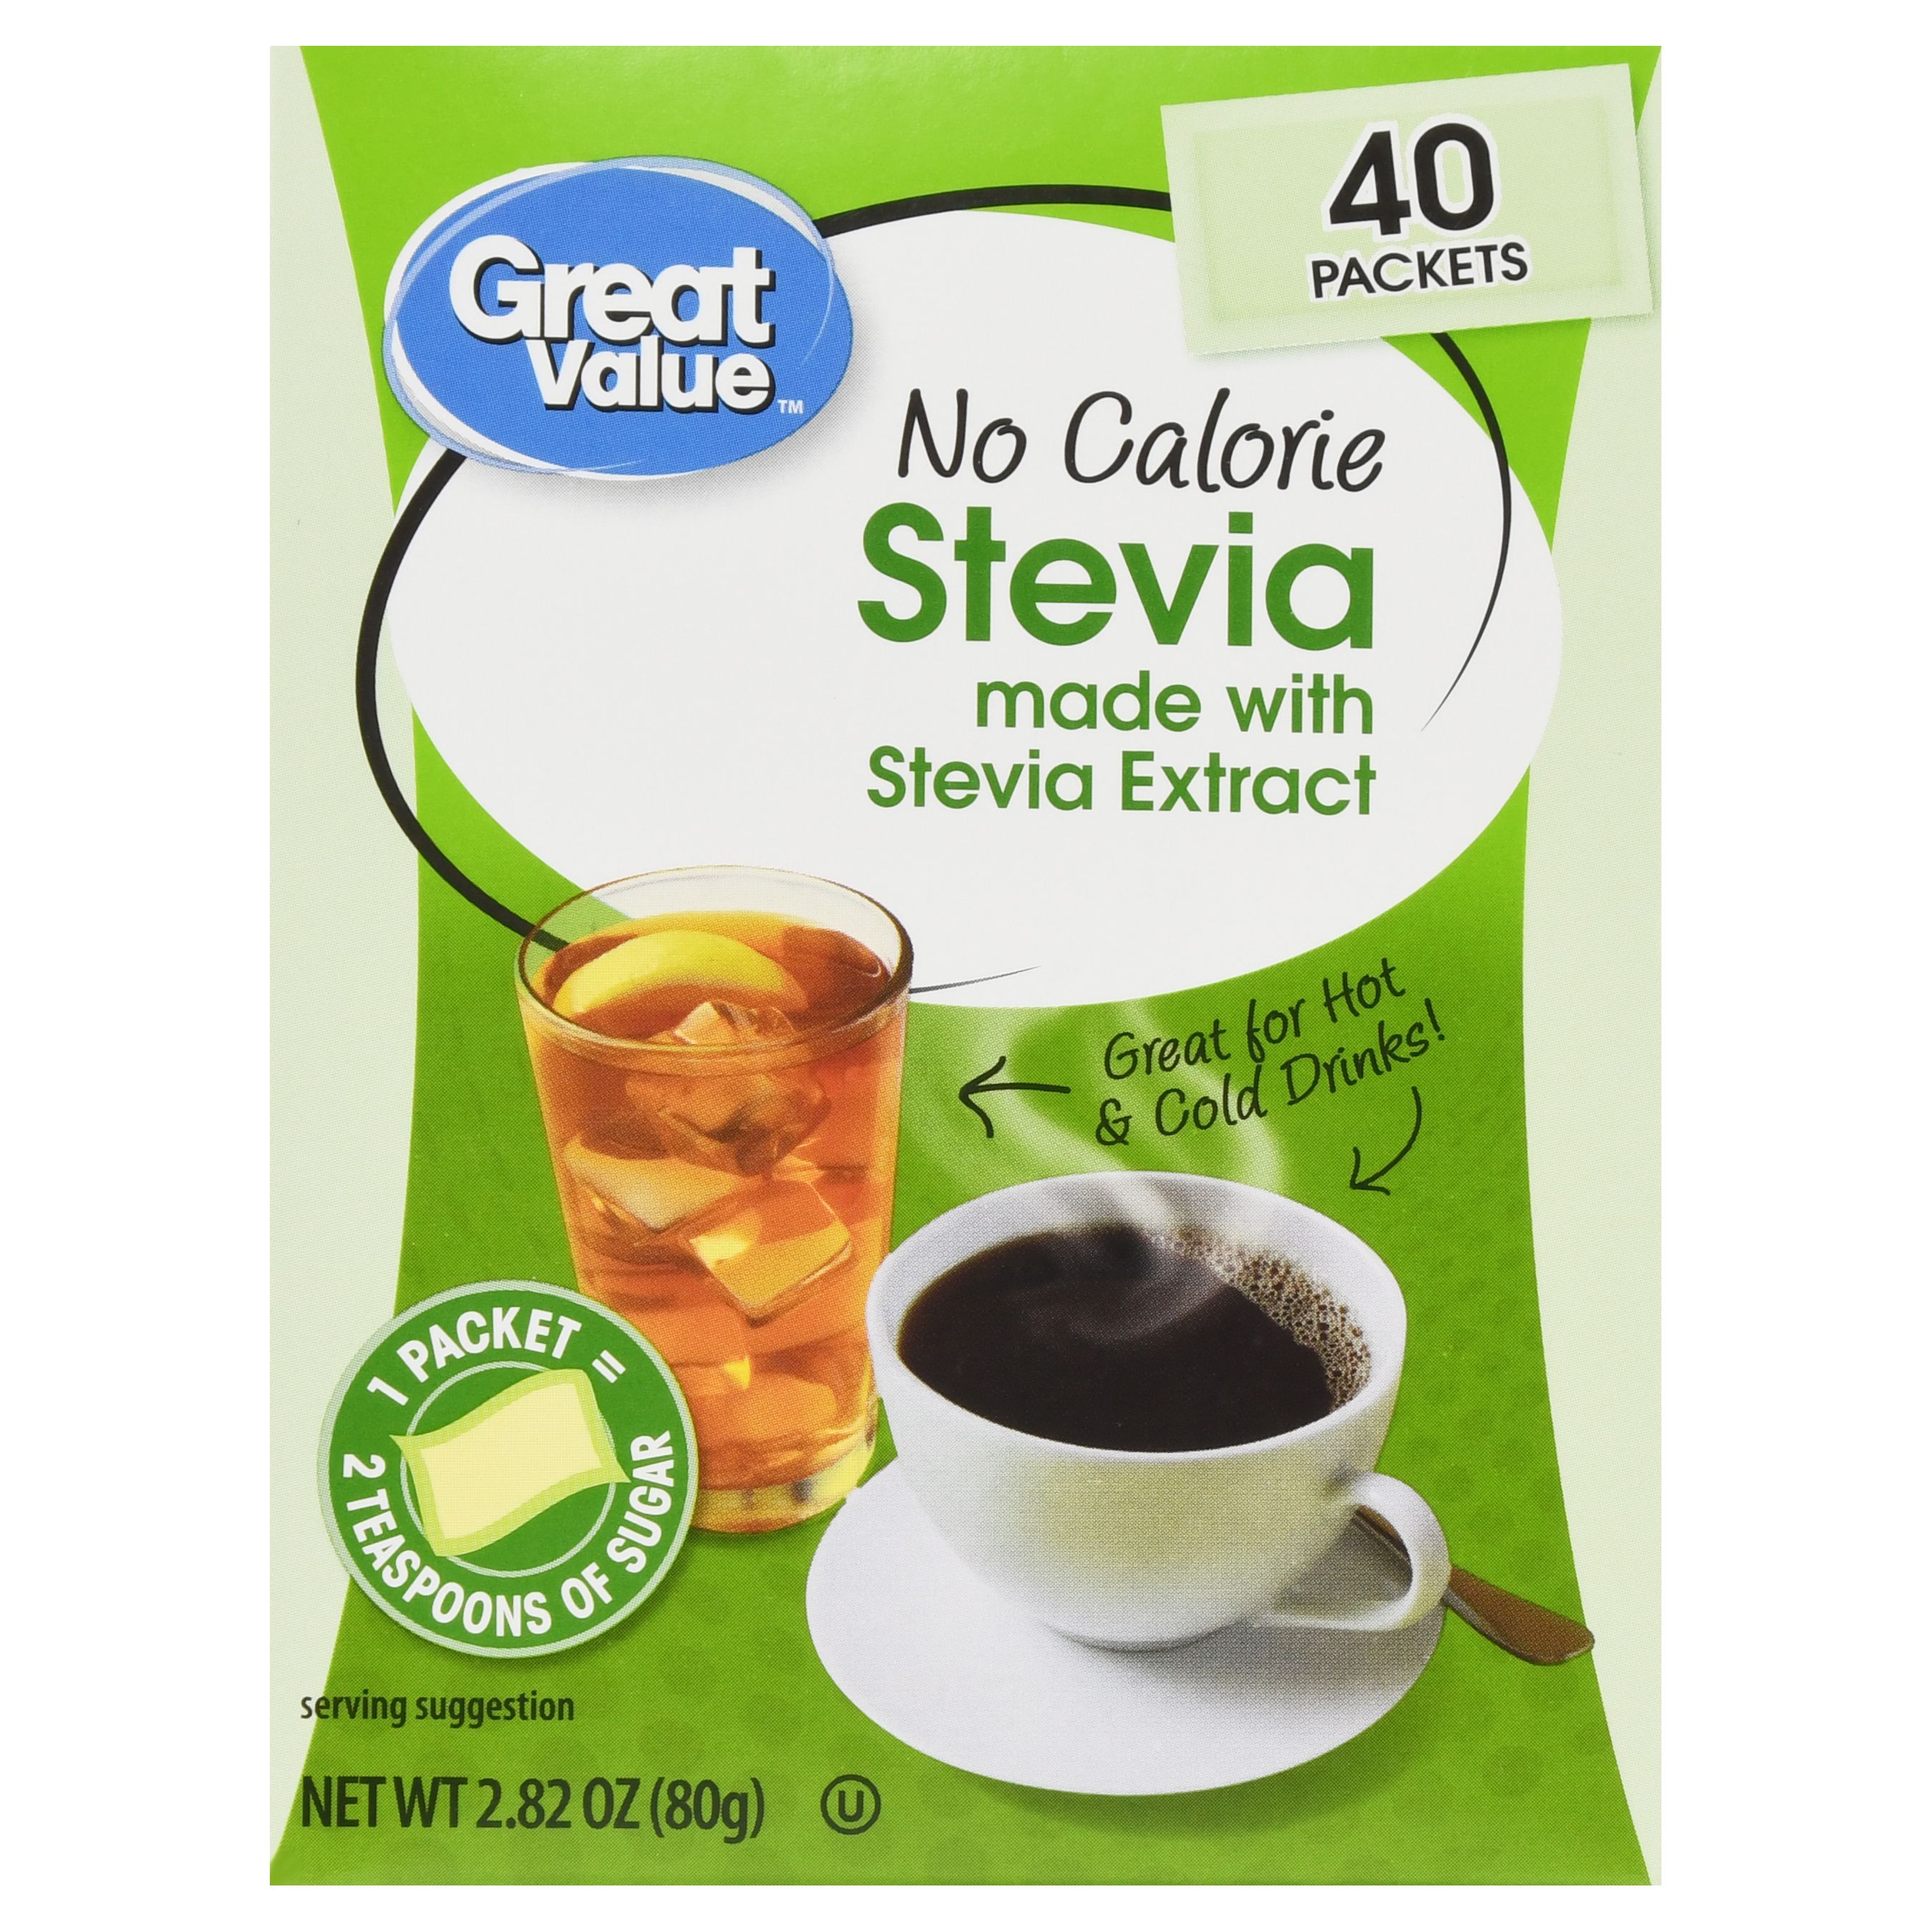 (3 Pack) Great Value No Calorie Stevia Sweetener Packets, 40ct Box Image